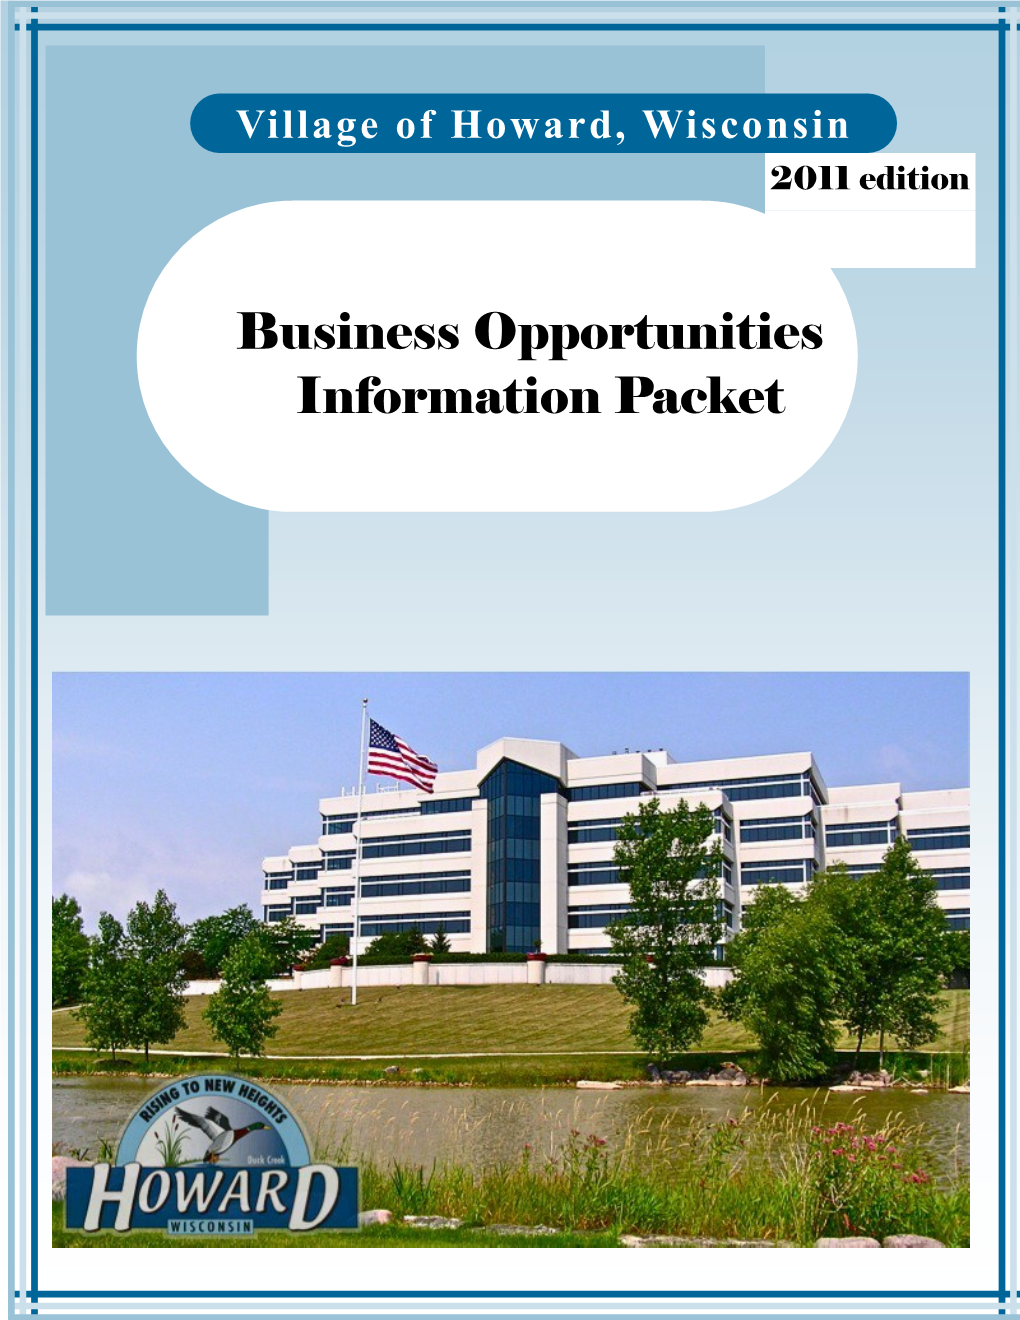 Business Opportunities Information Packet